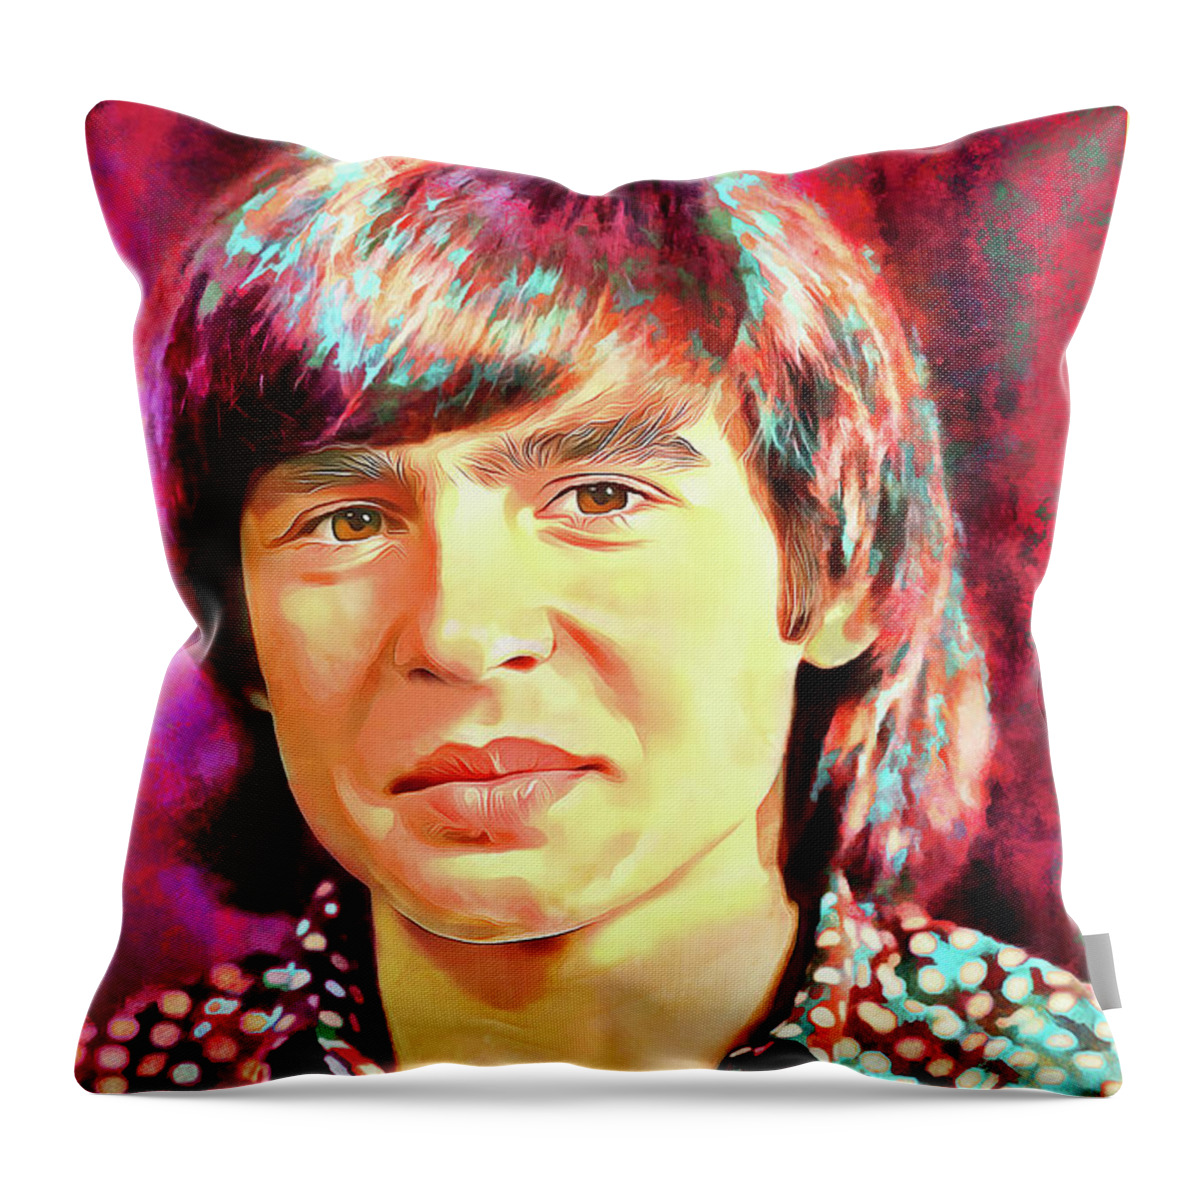 The Monkees Throw Pillow featuring the mixed media Davy Jones Tribute Art Daydream Believer by The Rocker Chic